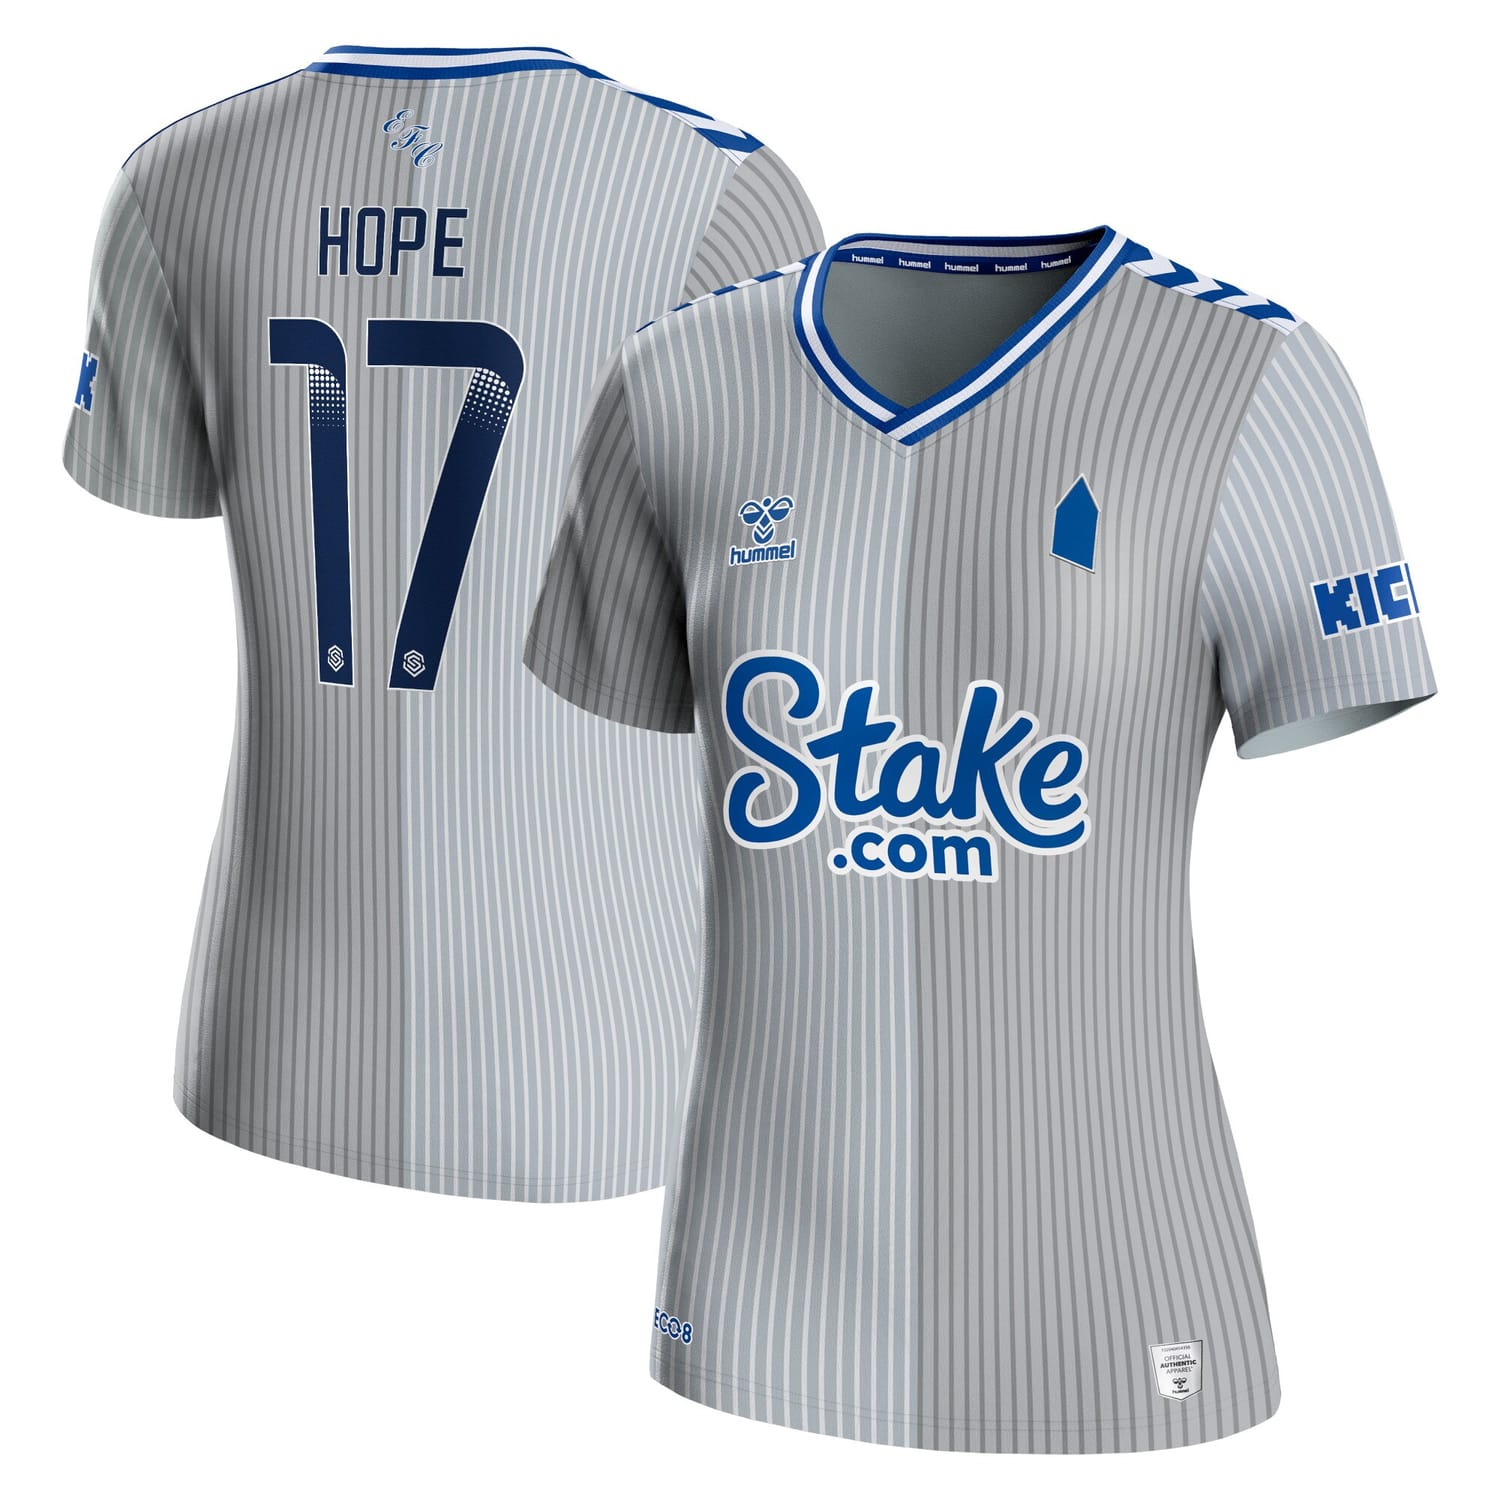 Premier League Everton Third WSL Jersey Shirt 2023-24 player Lucy Hope 17 printing for Women